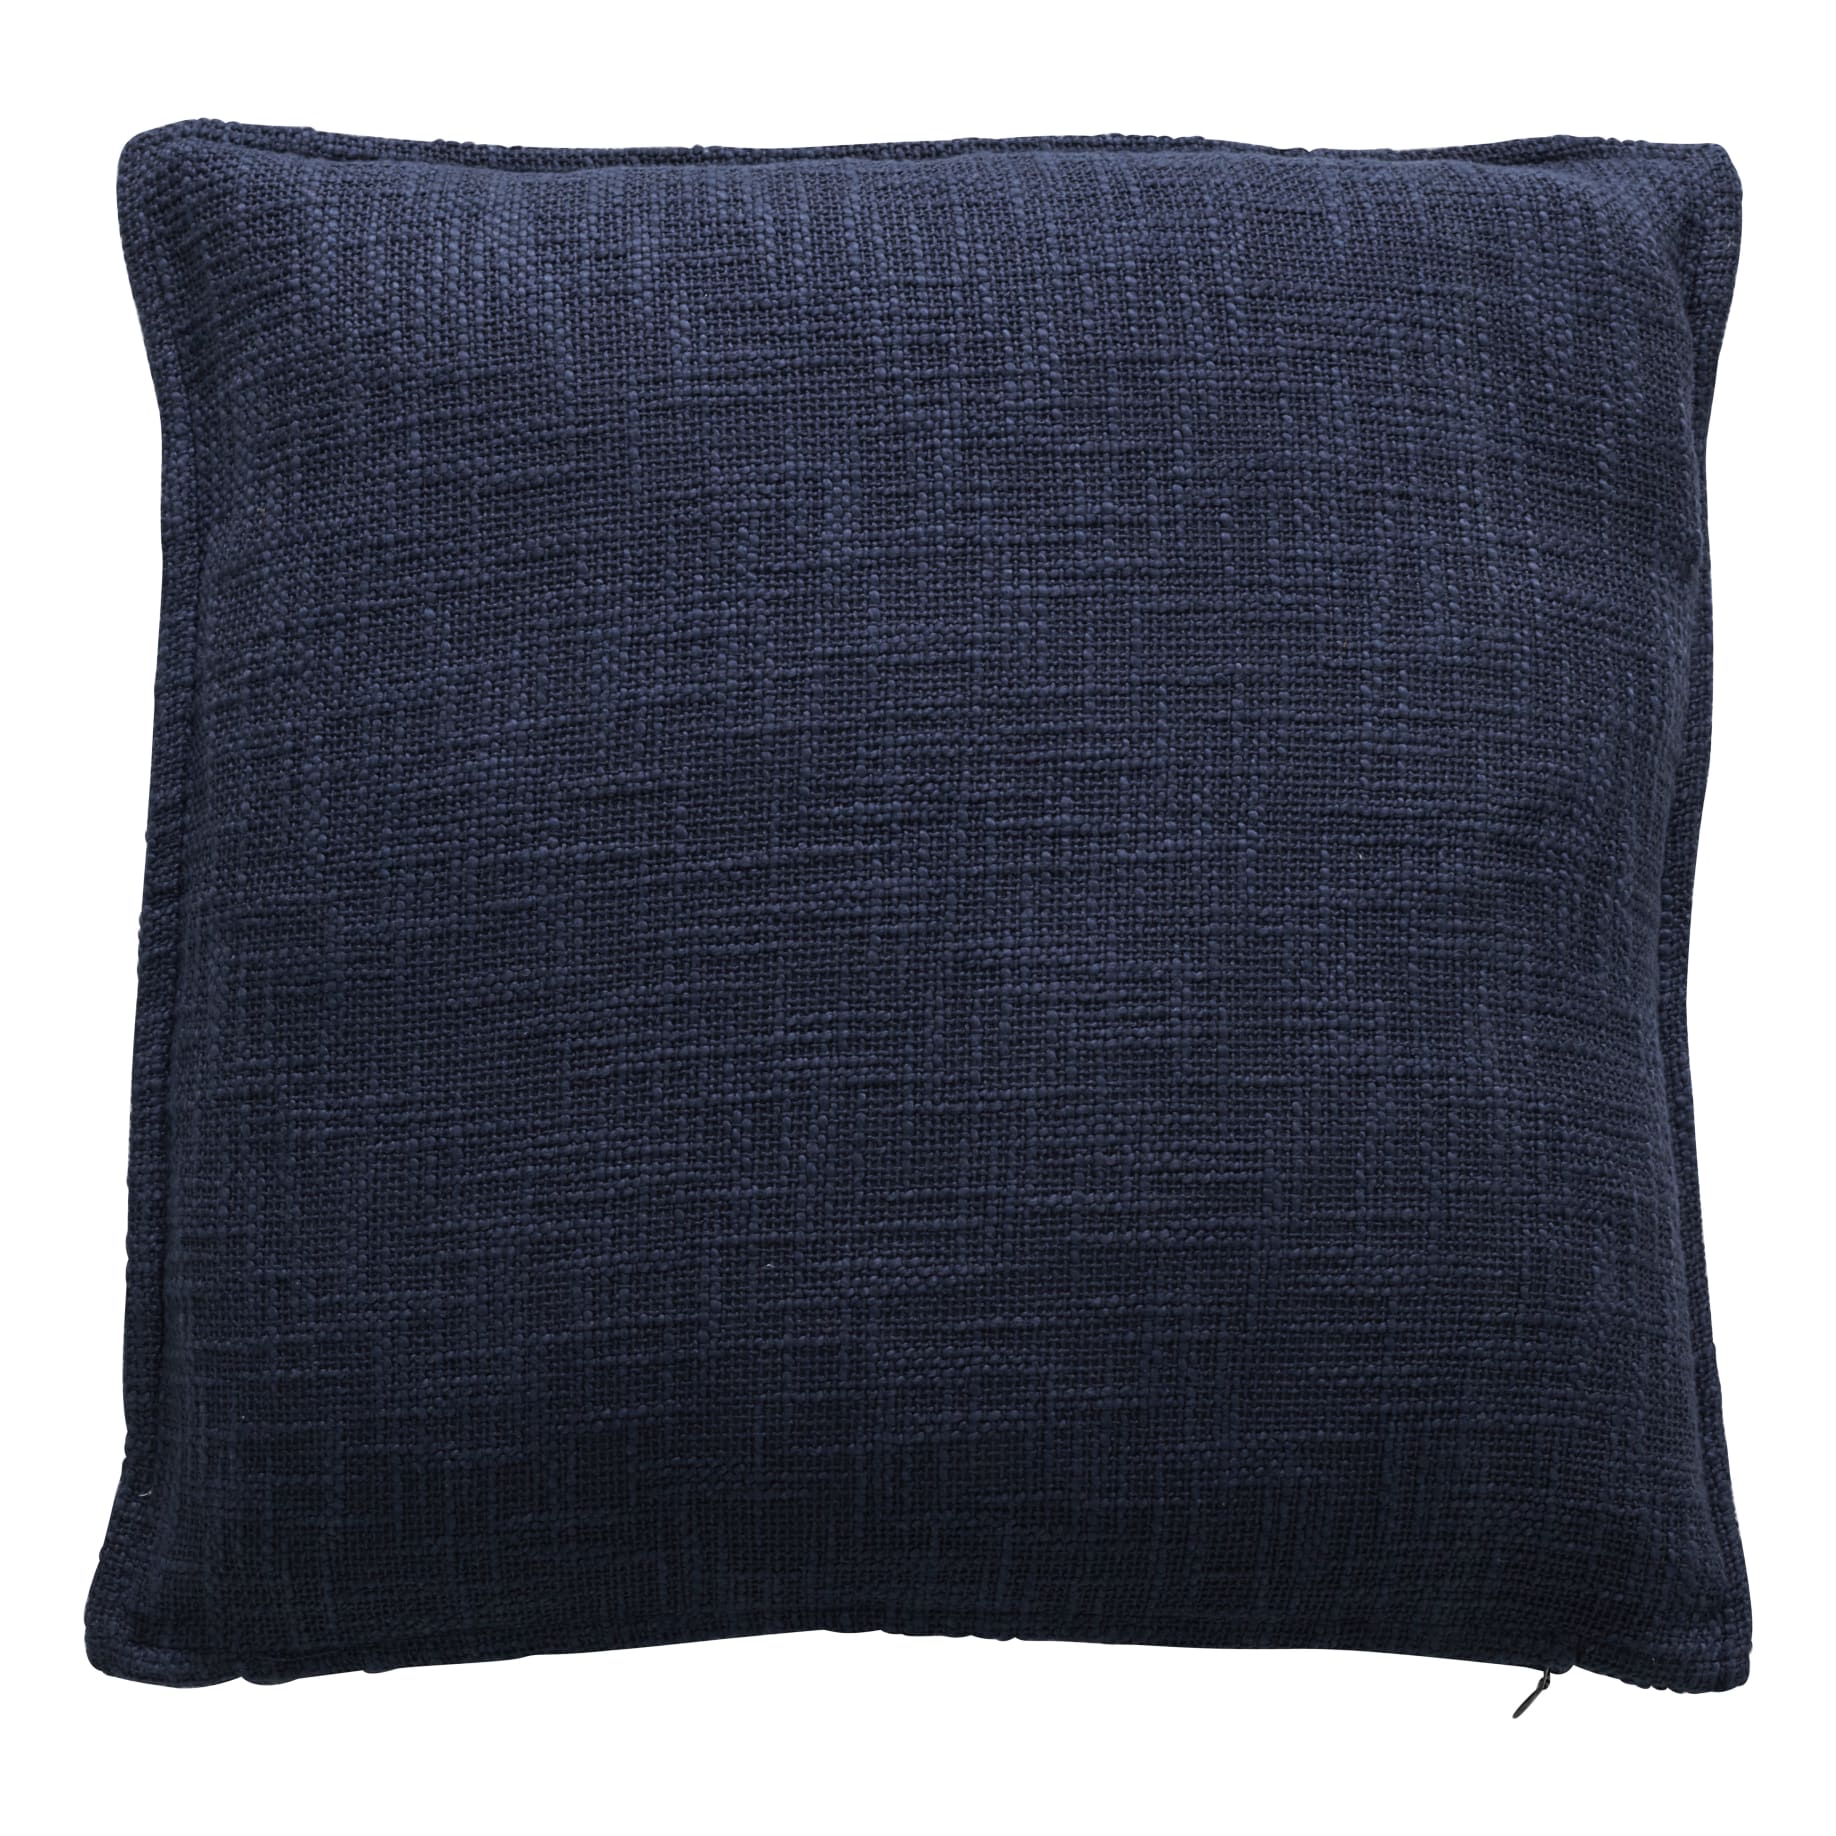 Adler Feather Fill Cushion 50x50cm in Navy